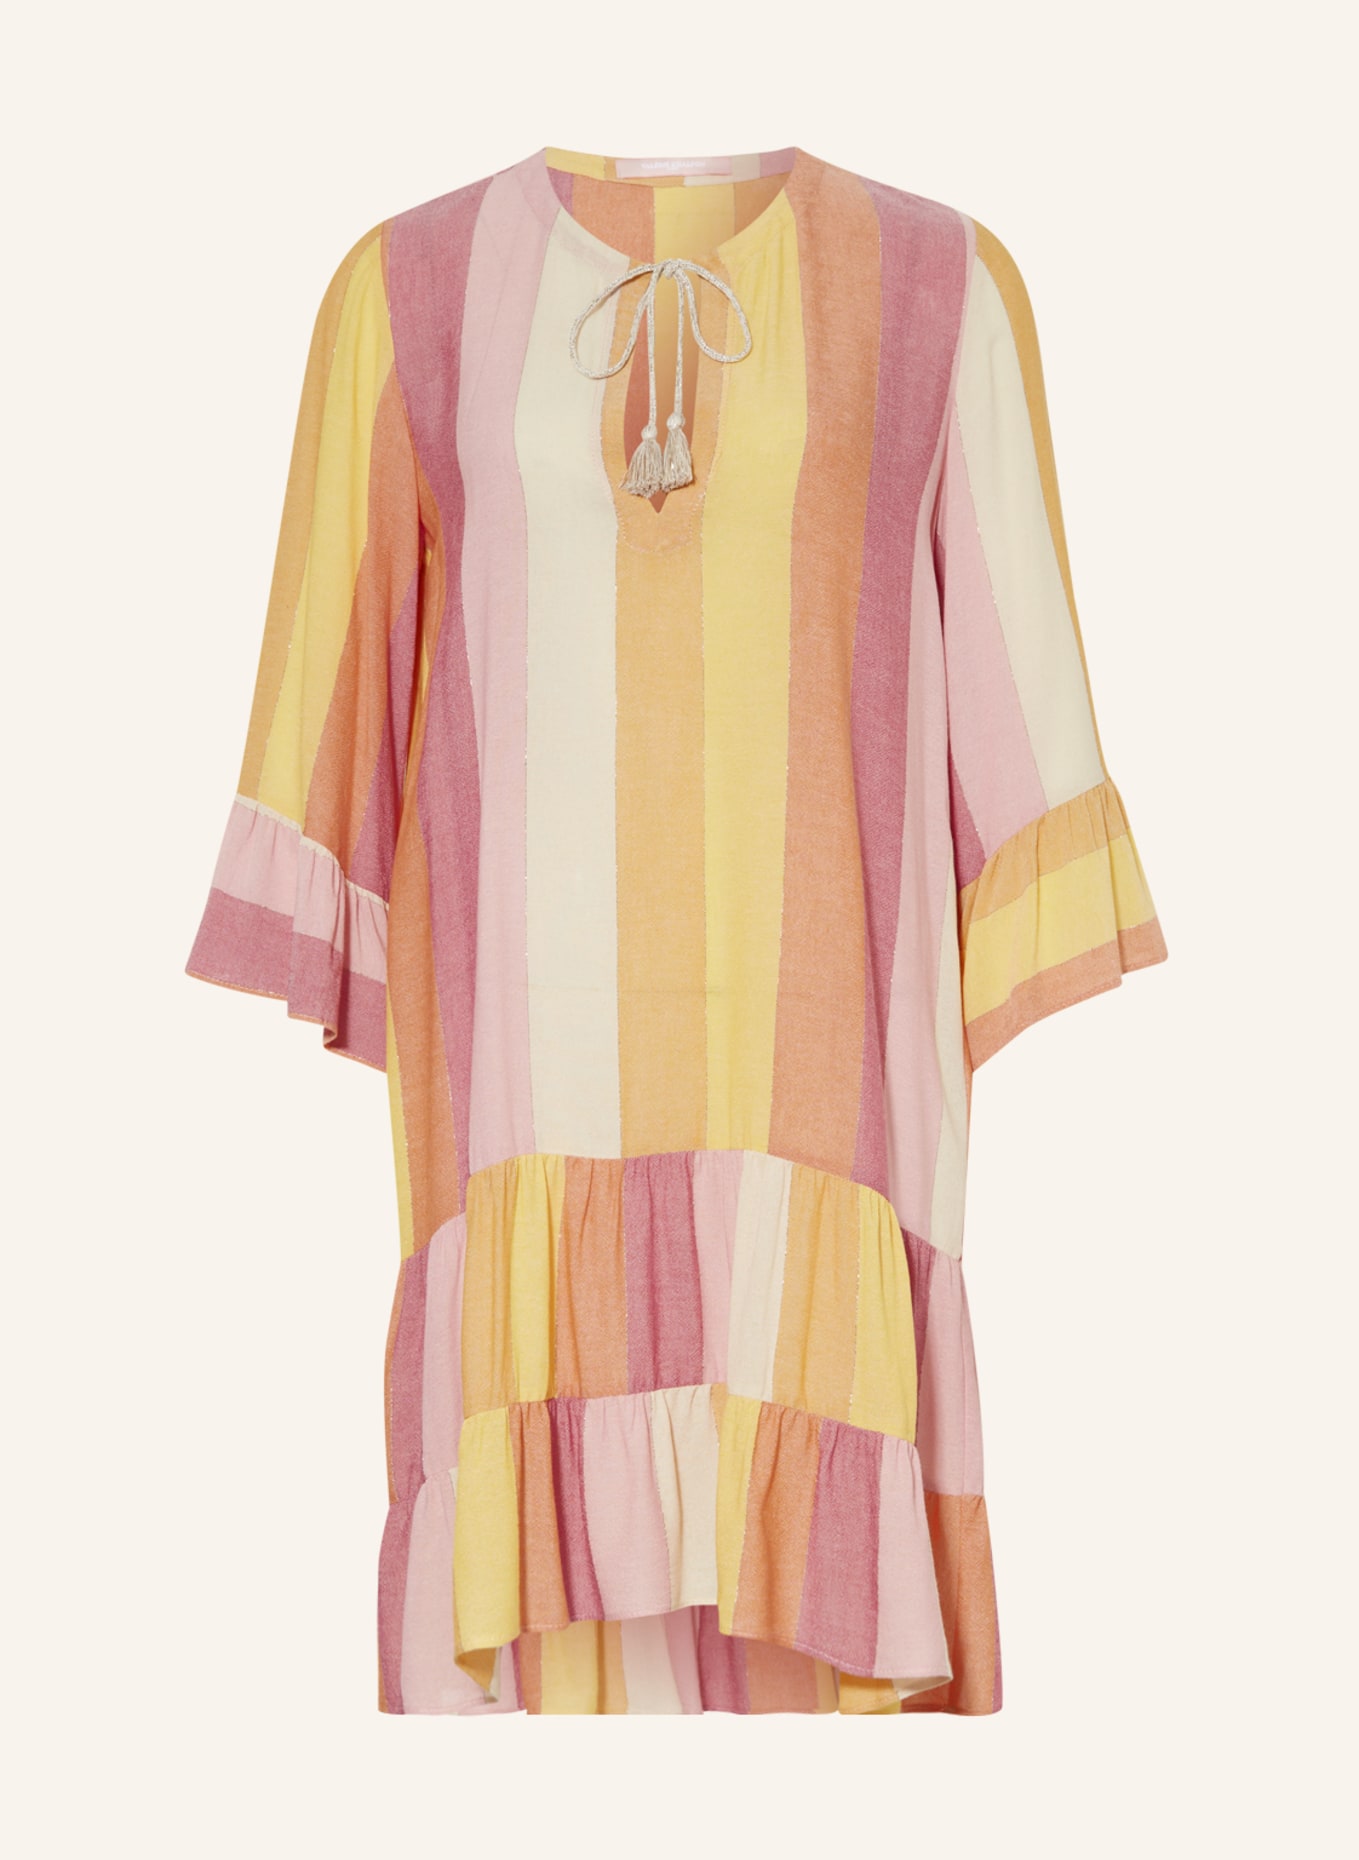 VALÉRIE KHALFON Dress MONTANA with 3/4 sleeve and glitter thread, Color: PINK/ LIGHT ORANGE/ YELLOW (Image 1)